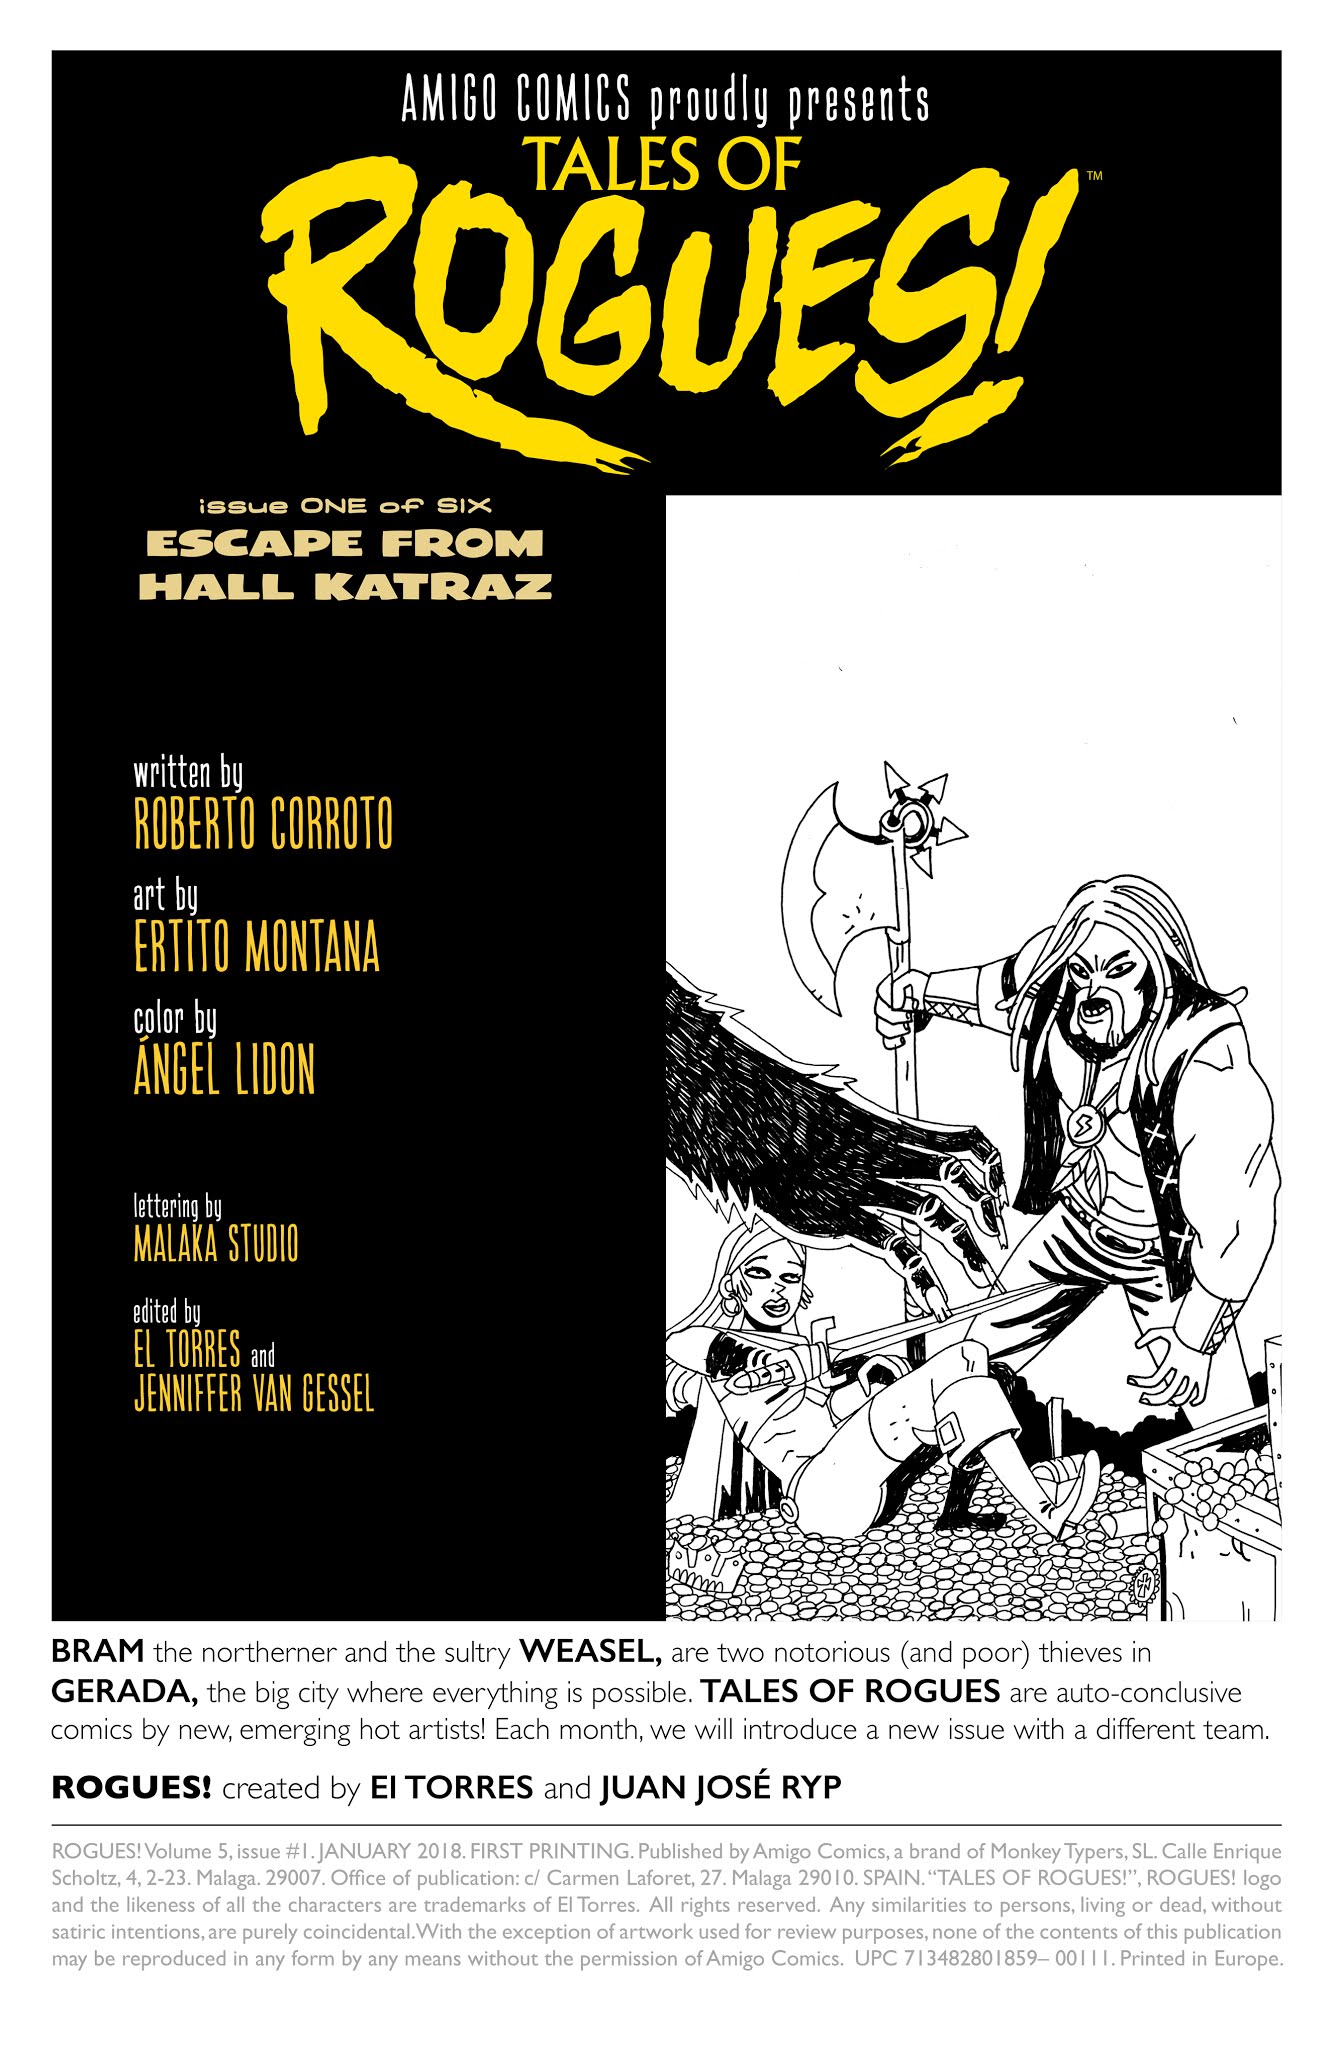 Read online Tales of Rogues! comic -  Issue #1 - 2